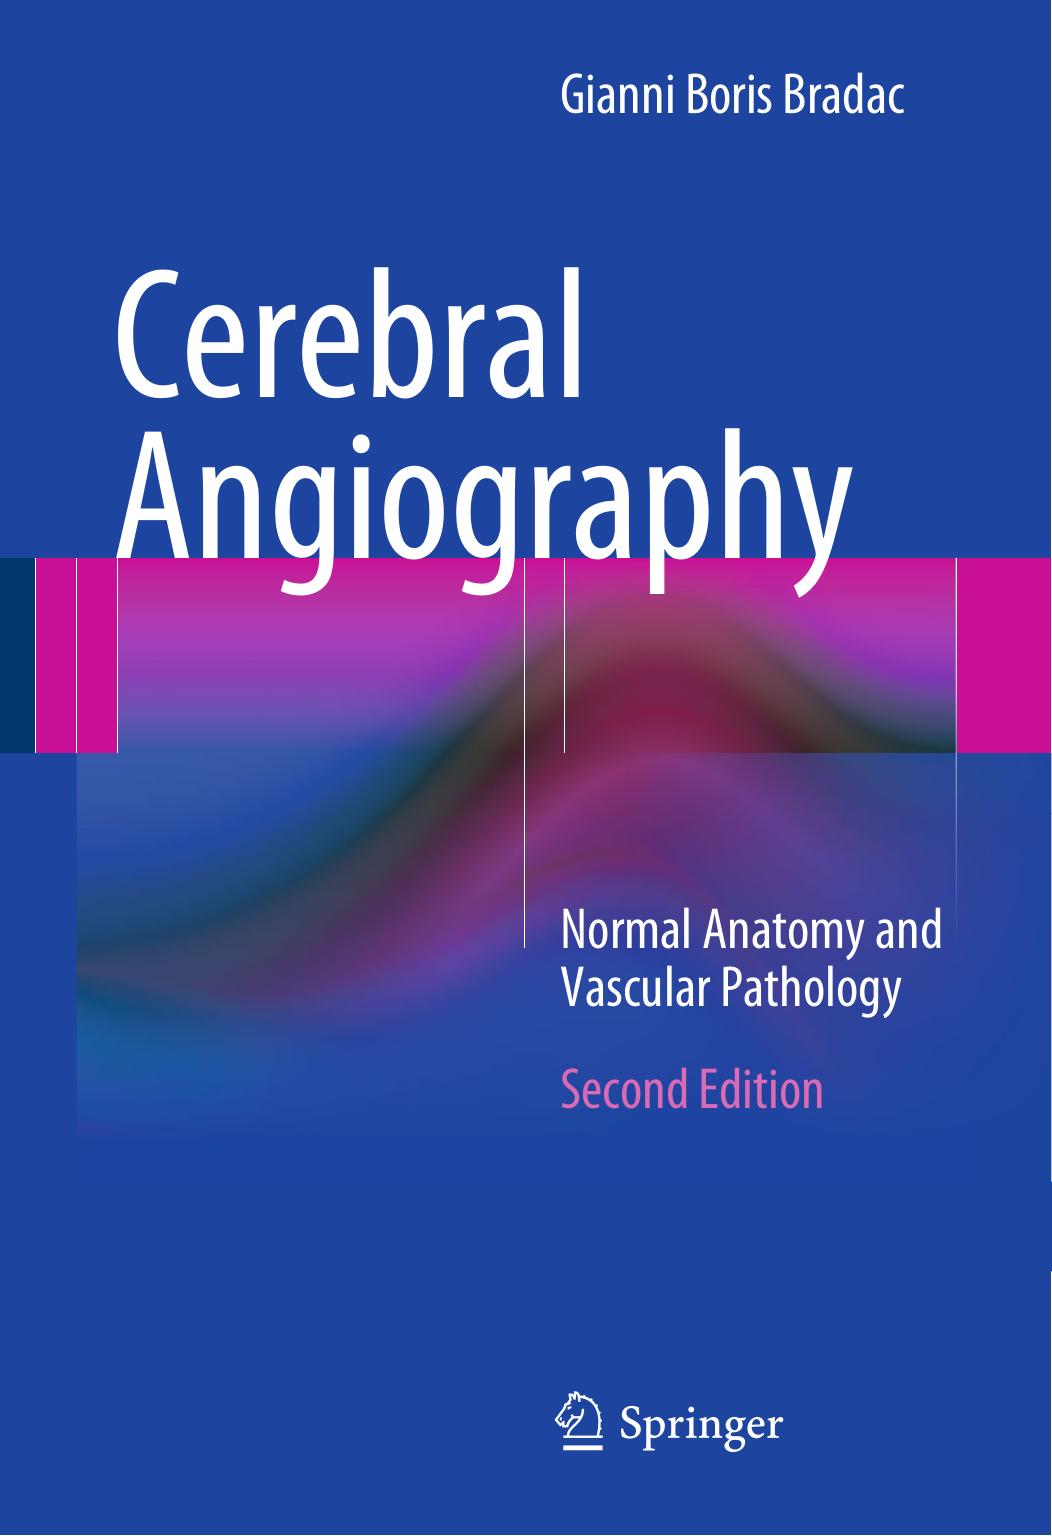 Cerebral Angiography-Normal Anatomy and Vascular Pathology.jpg